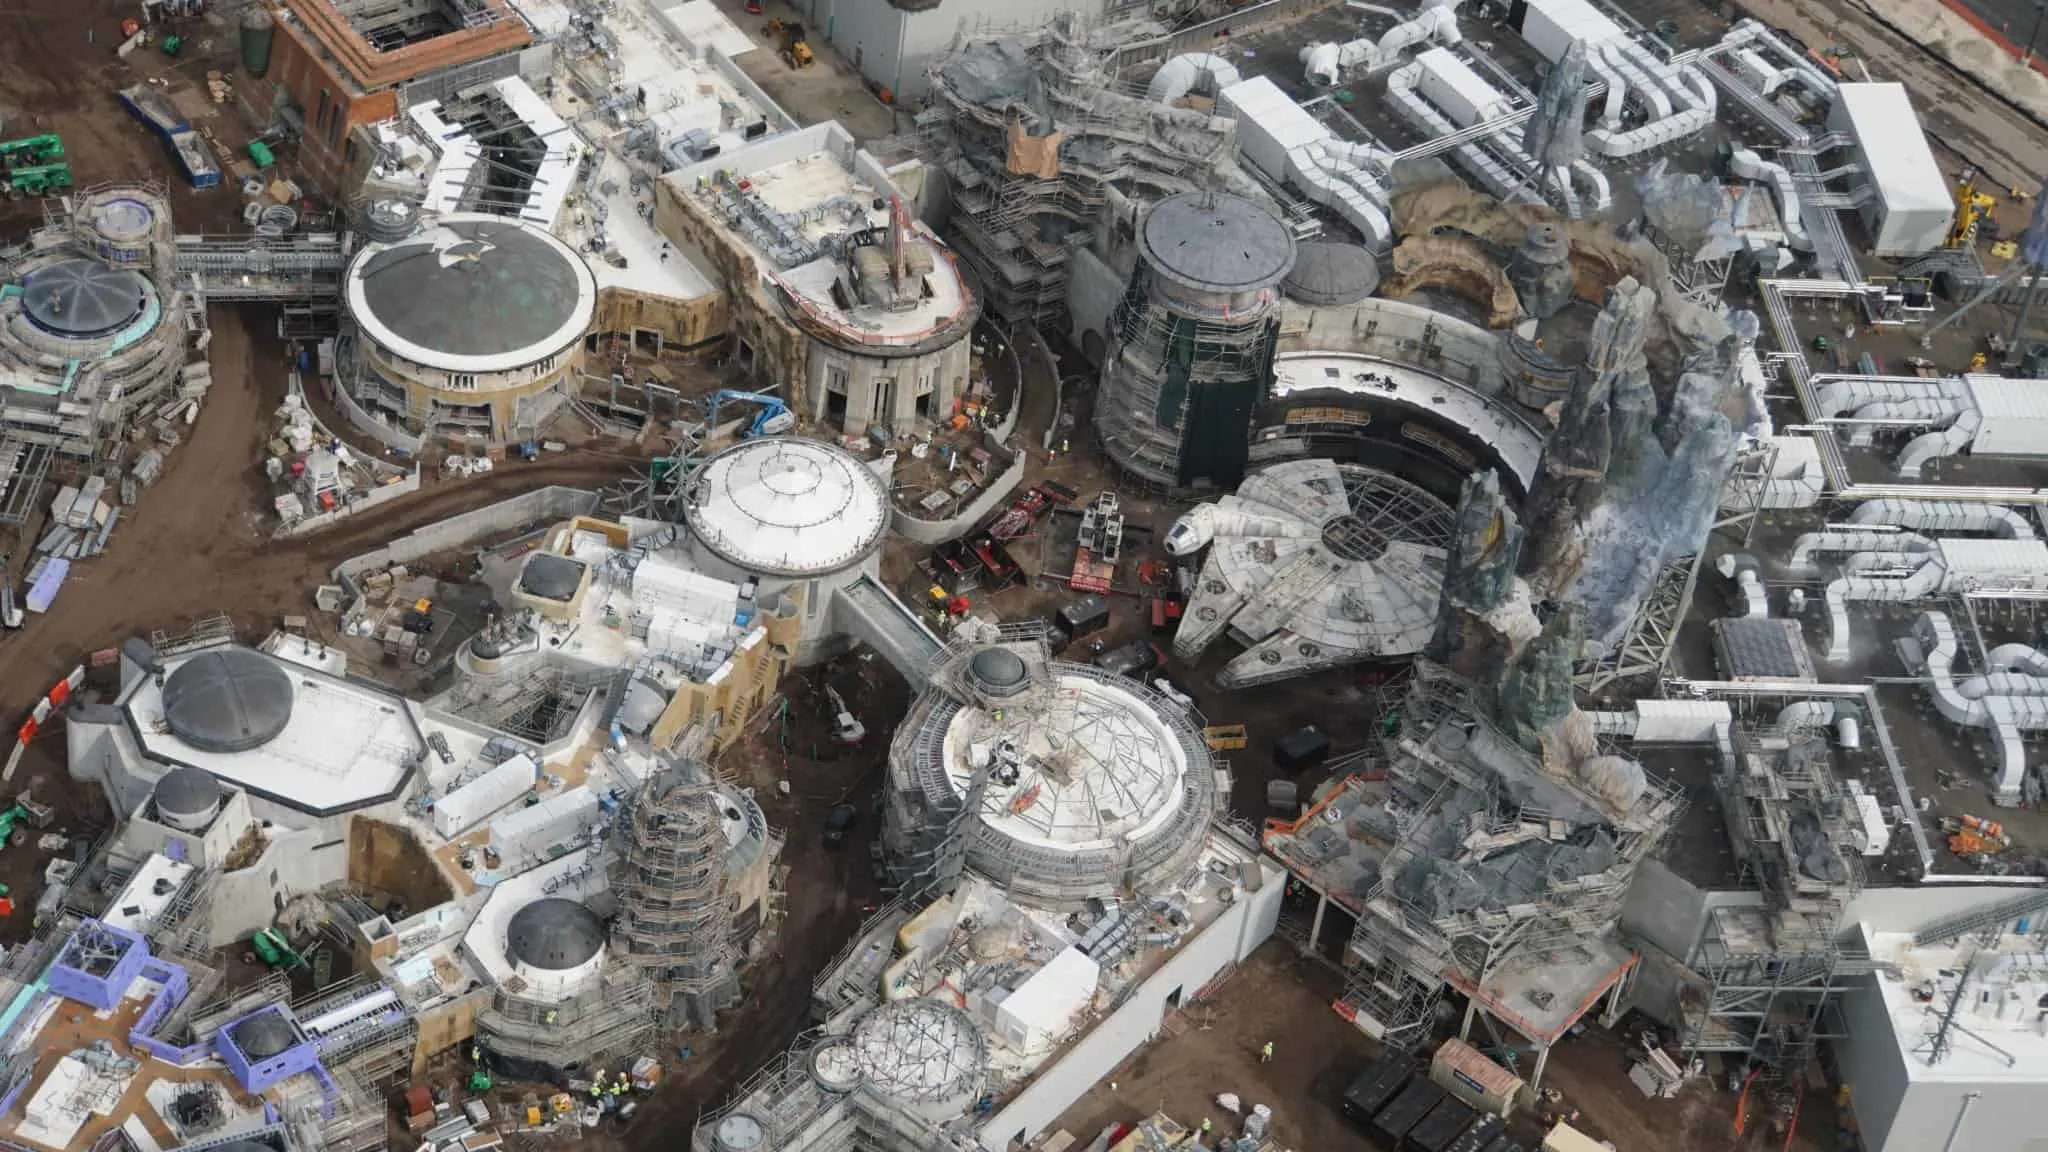 Galaxy's Edge Update February 2019 Black Spire Outpost and Millennium Falcon